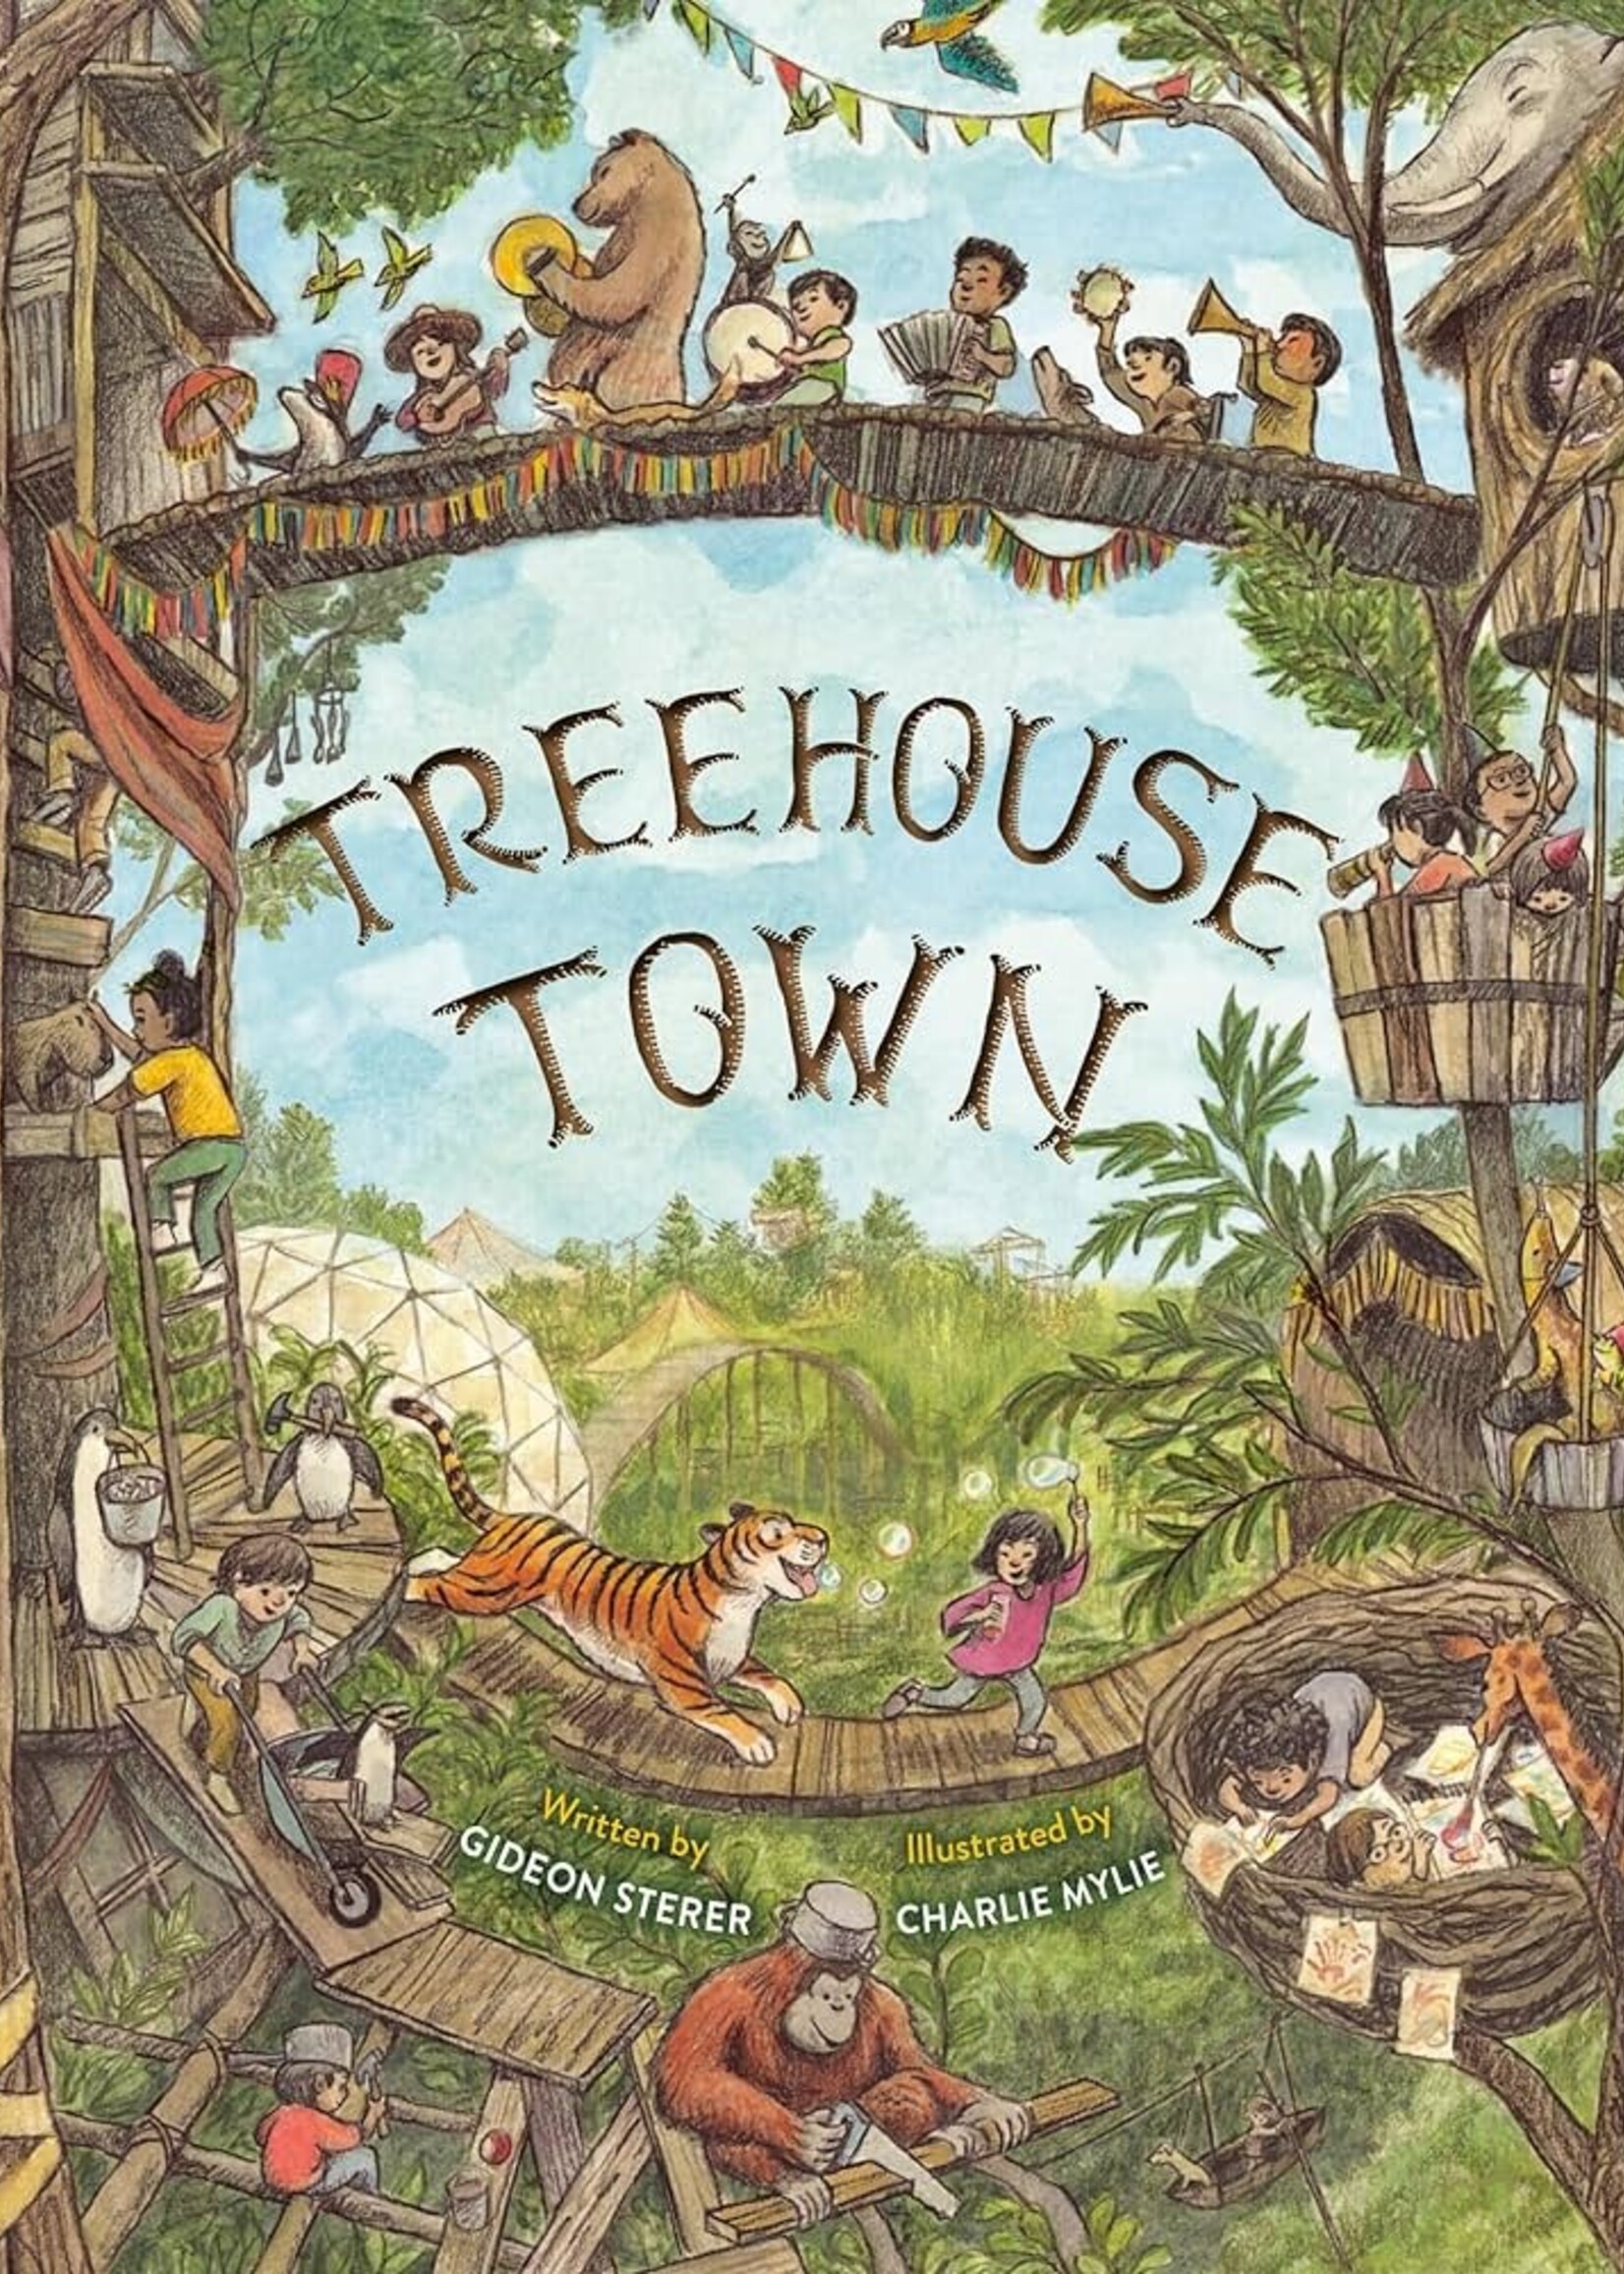 Treehouse Town - Hardcover